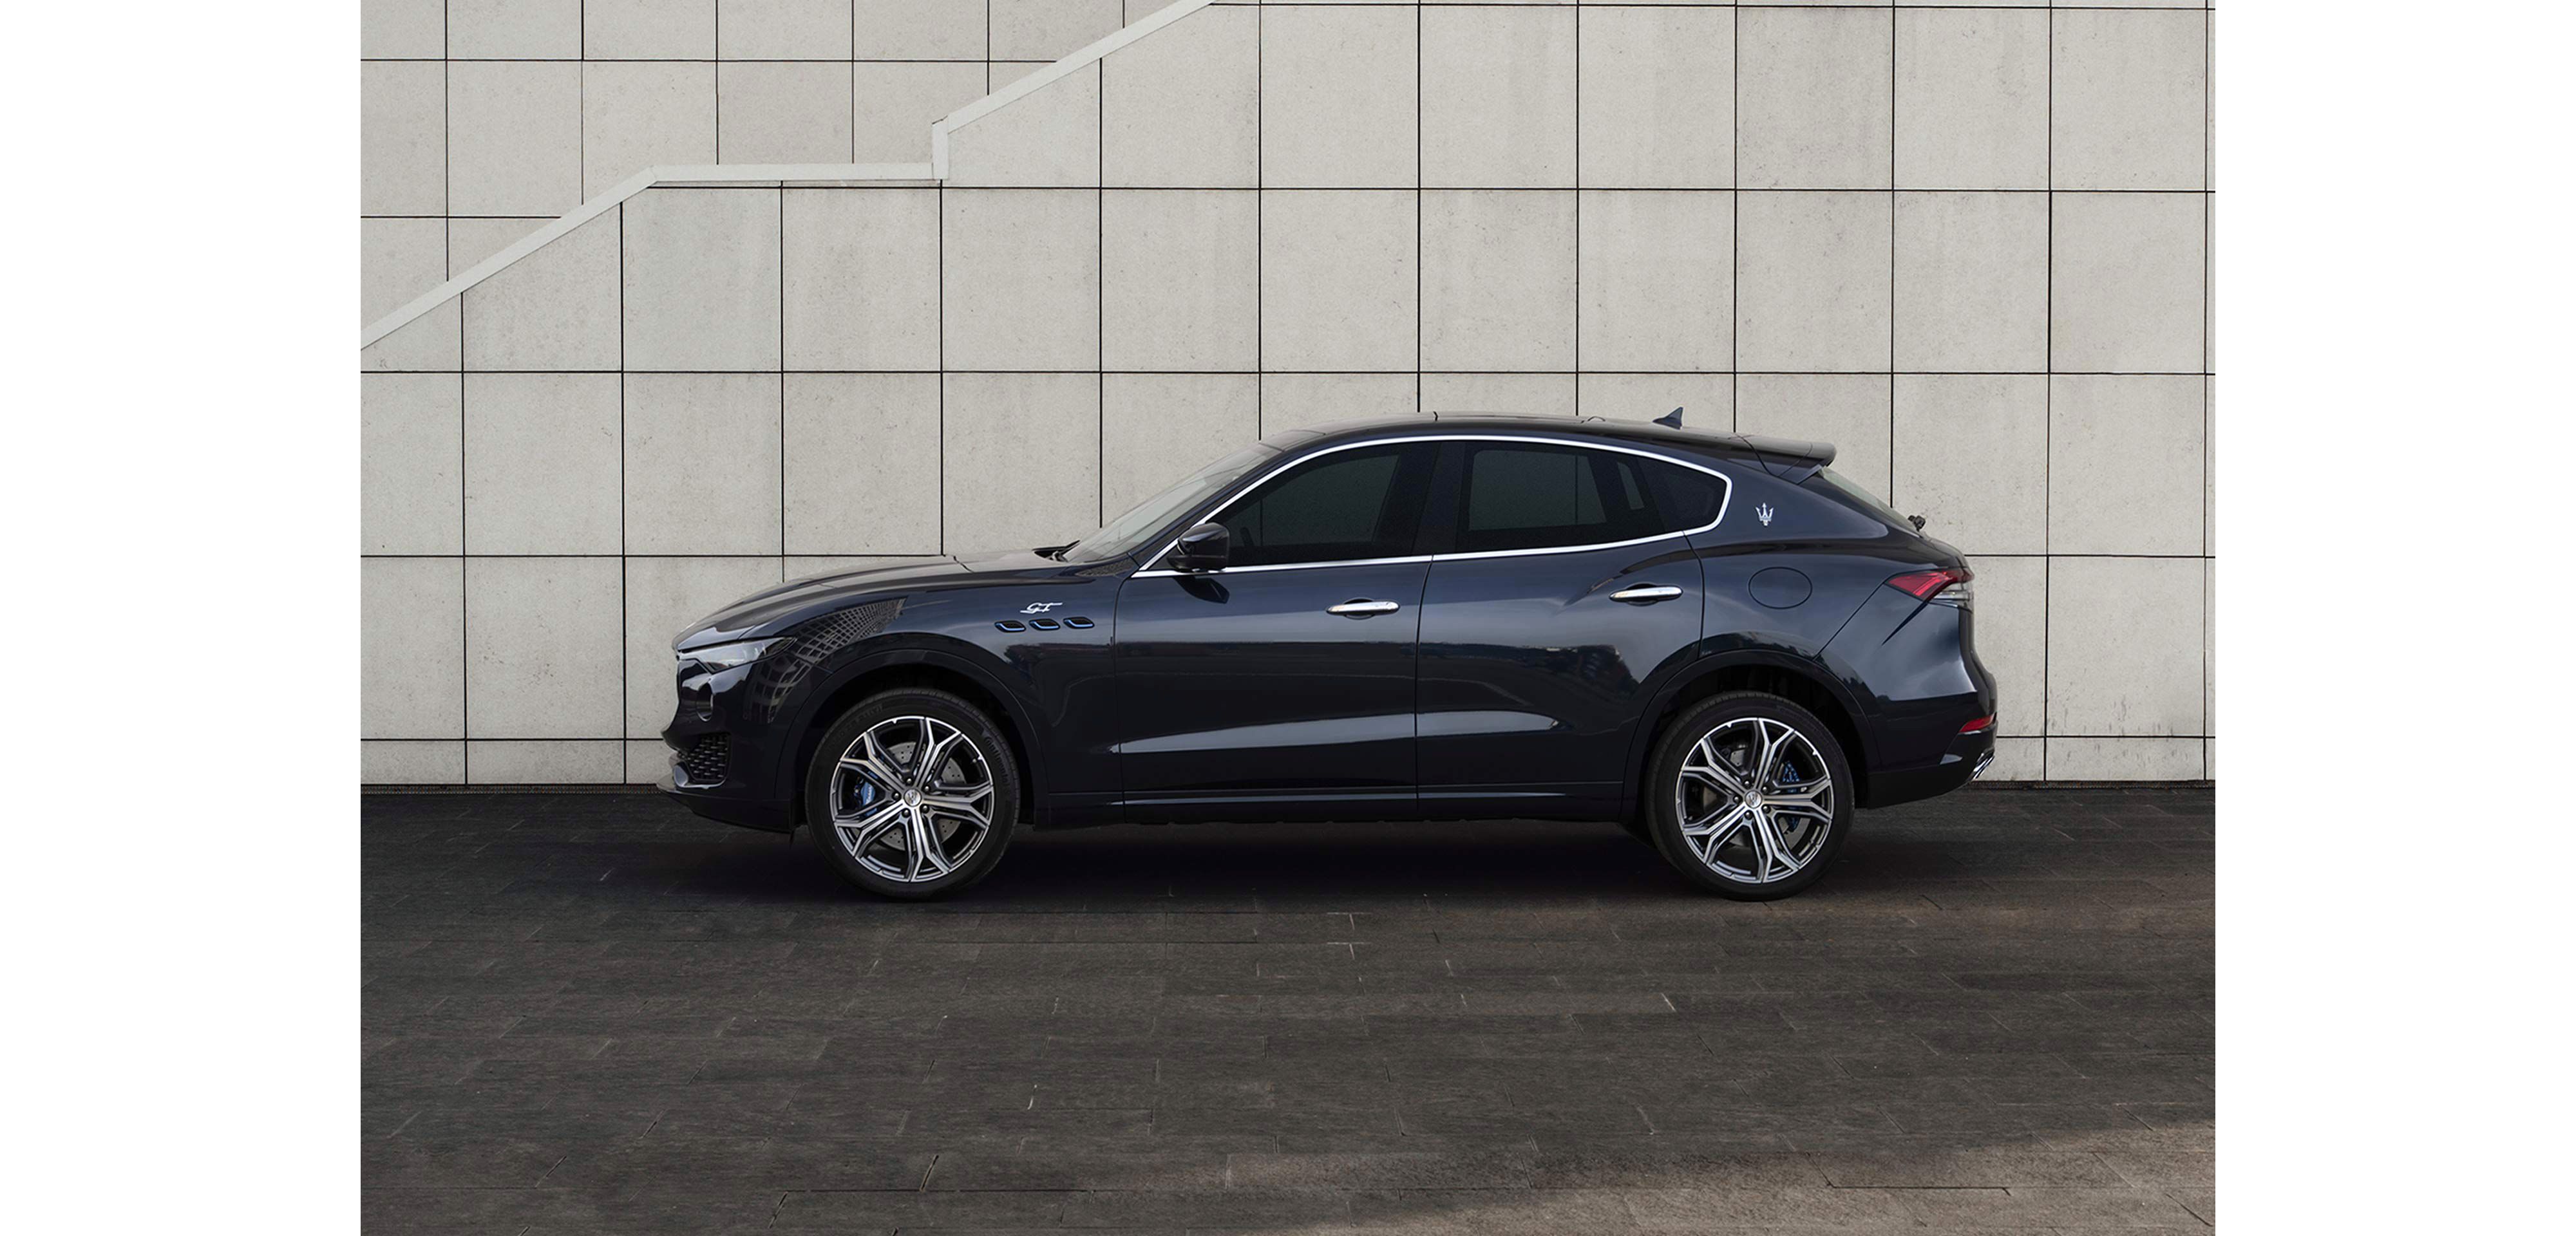 fout Verborgen buitenaards wezen Maserati Levante: the Luxury SUV signed by the Trident